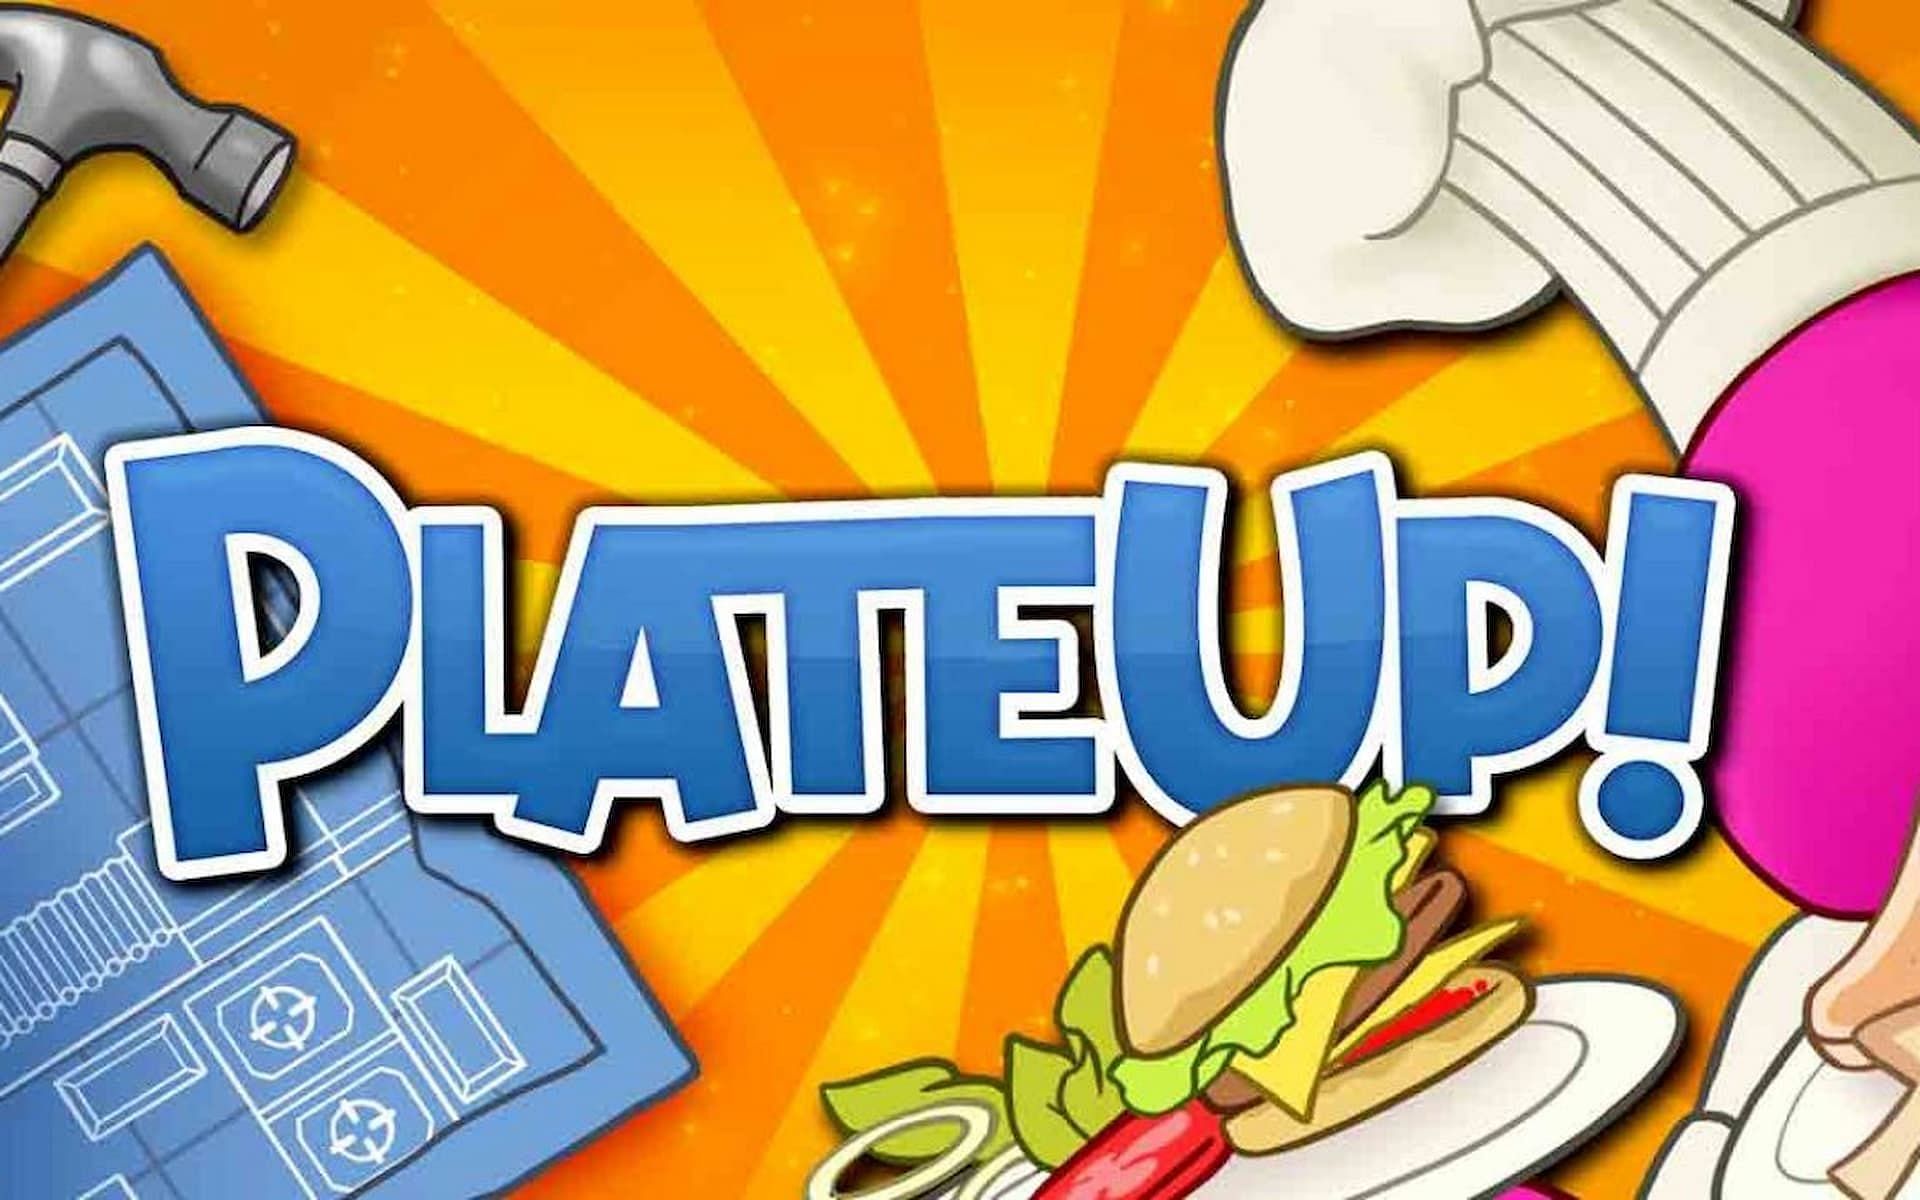 plate up mac download